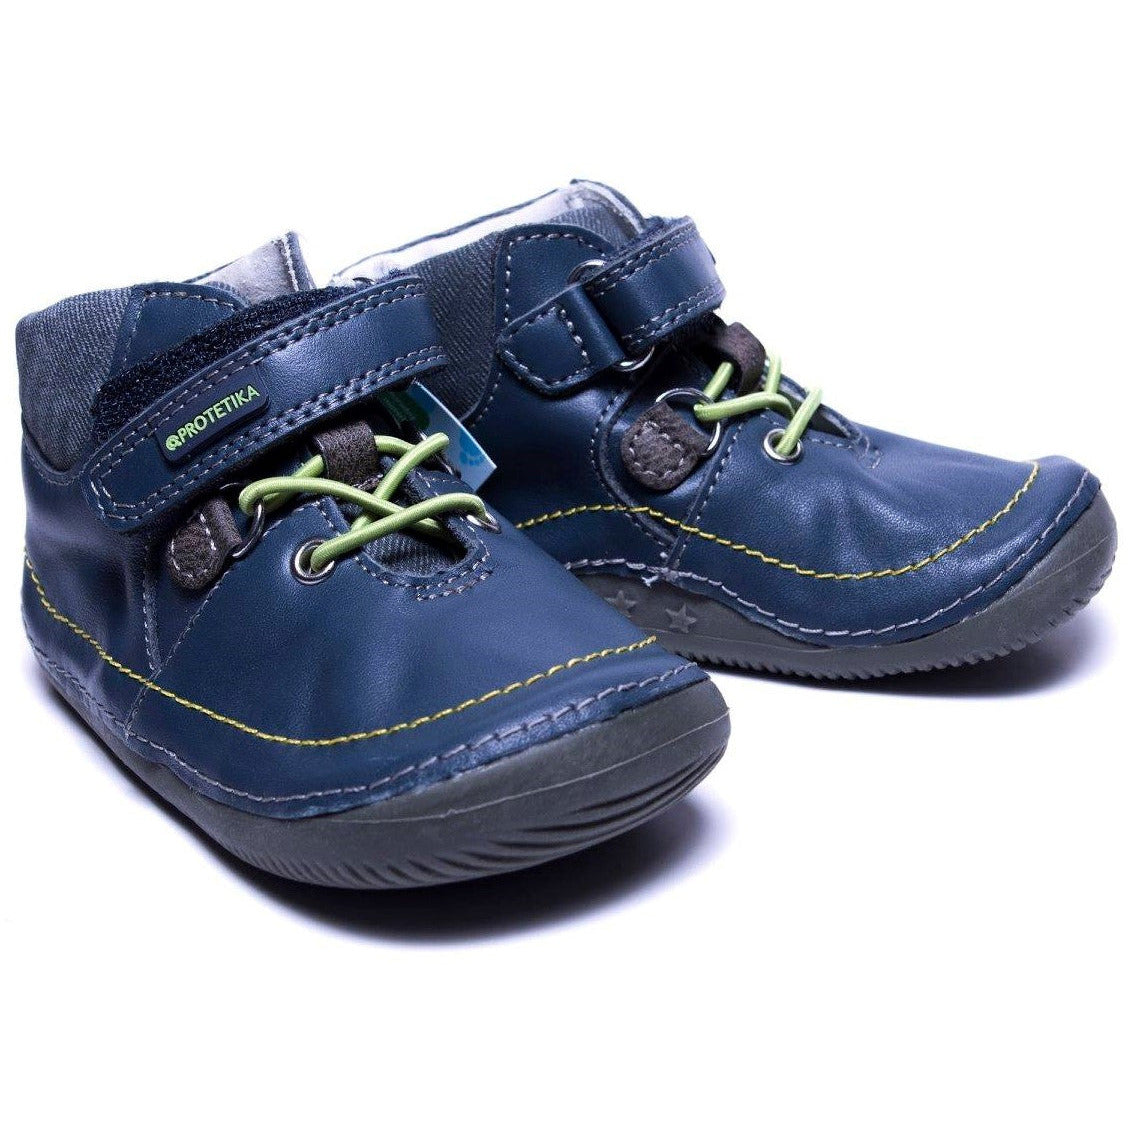 These ankle barefoot shoes for toddlers protect the tiny walker from a bit cold weather.